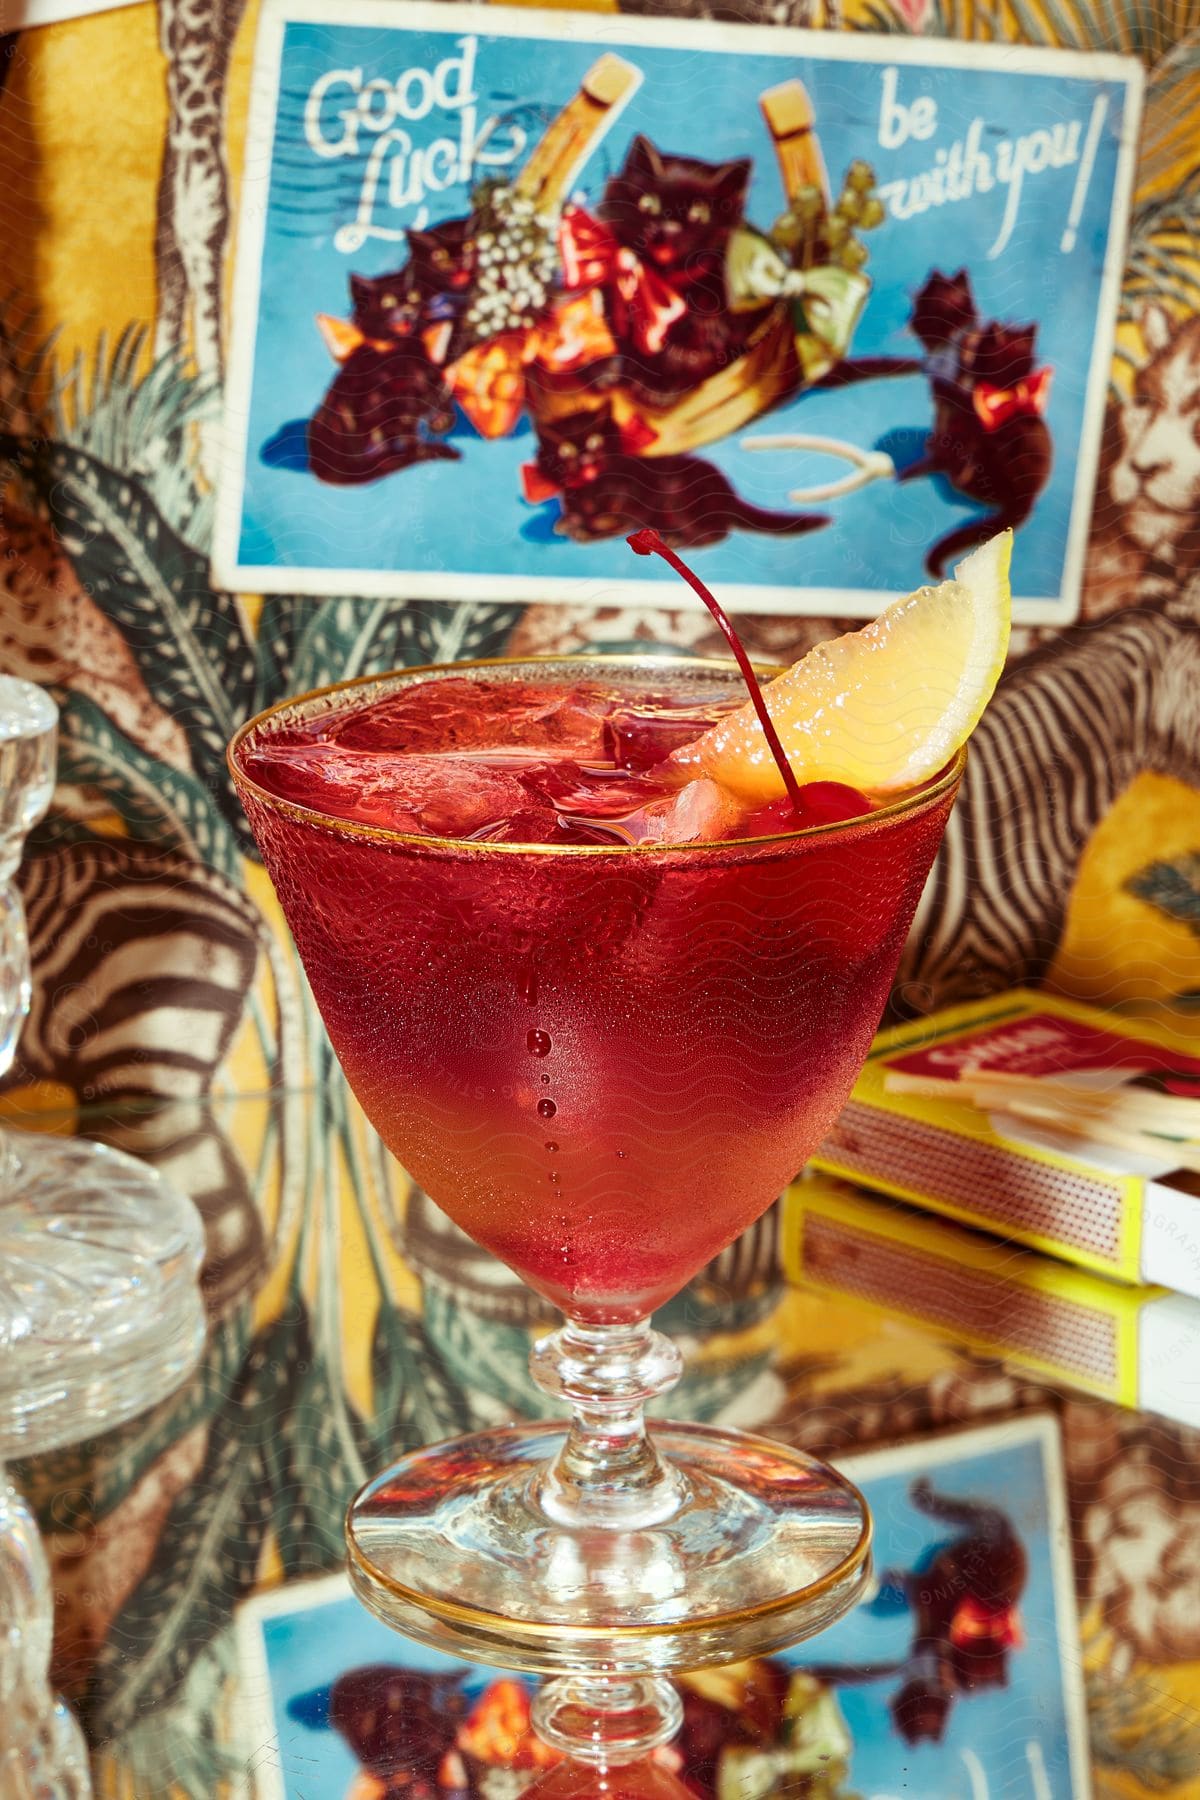 A cocktail garnished with lemon wedge and a cherry set on a glass table under a postcard and colorful decor